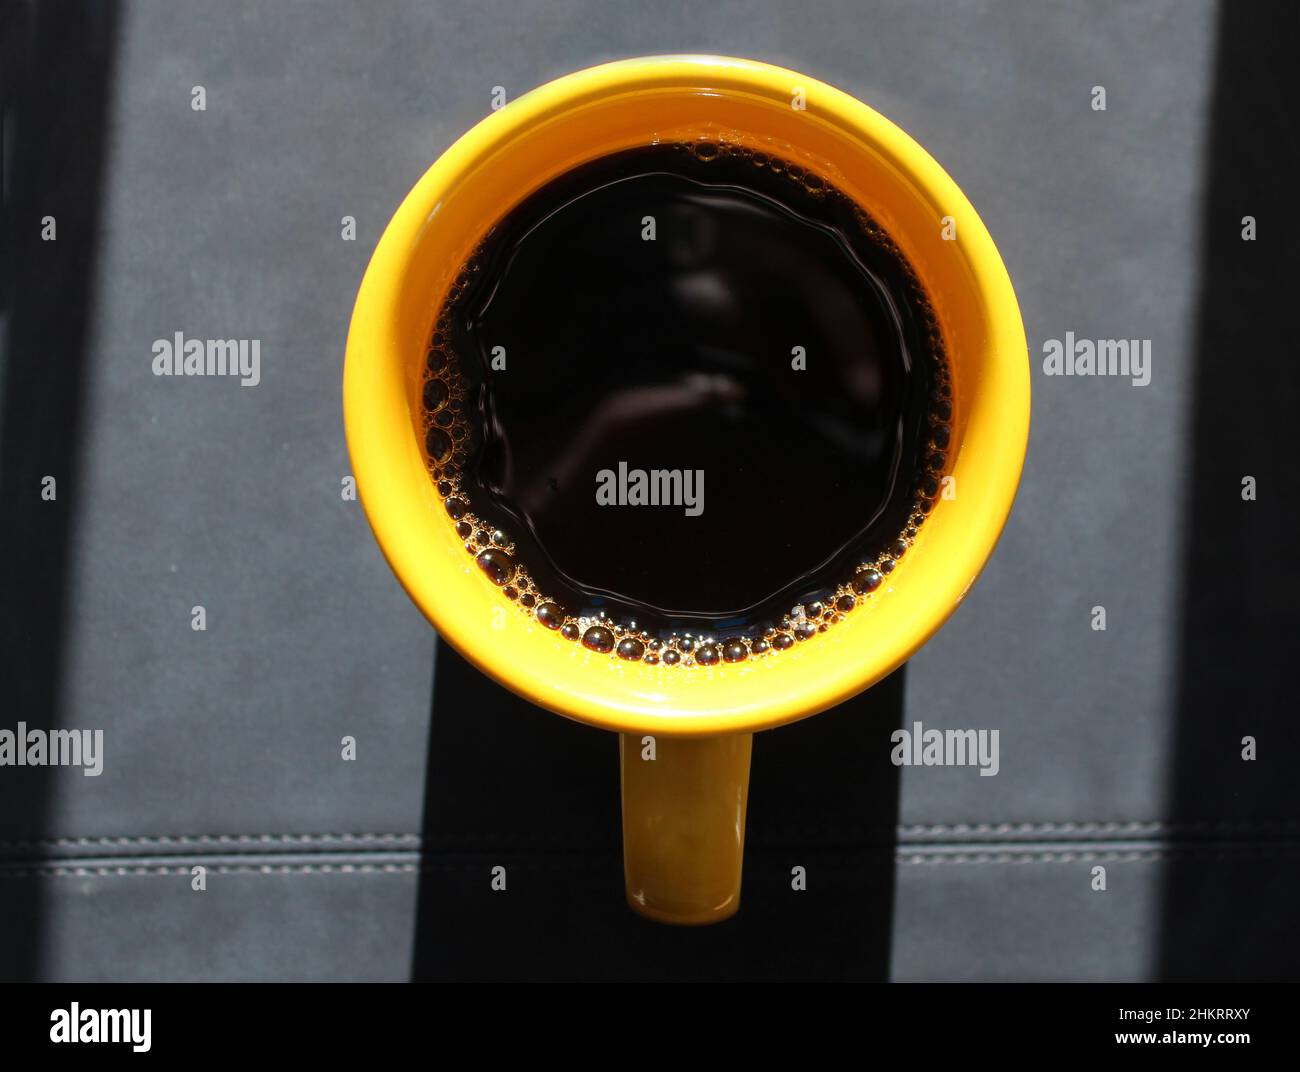 A Bright Yellow Mug Filled with Black Coffee Stock Photo